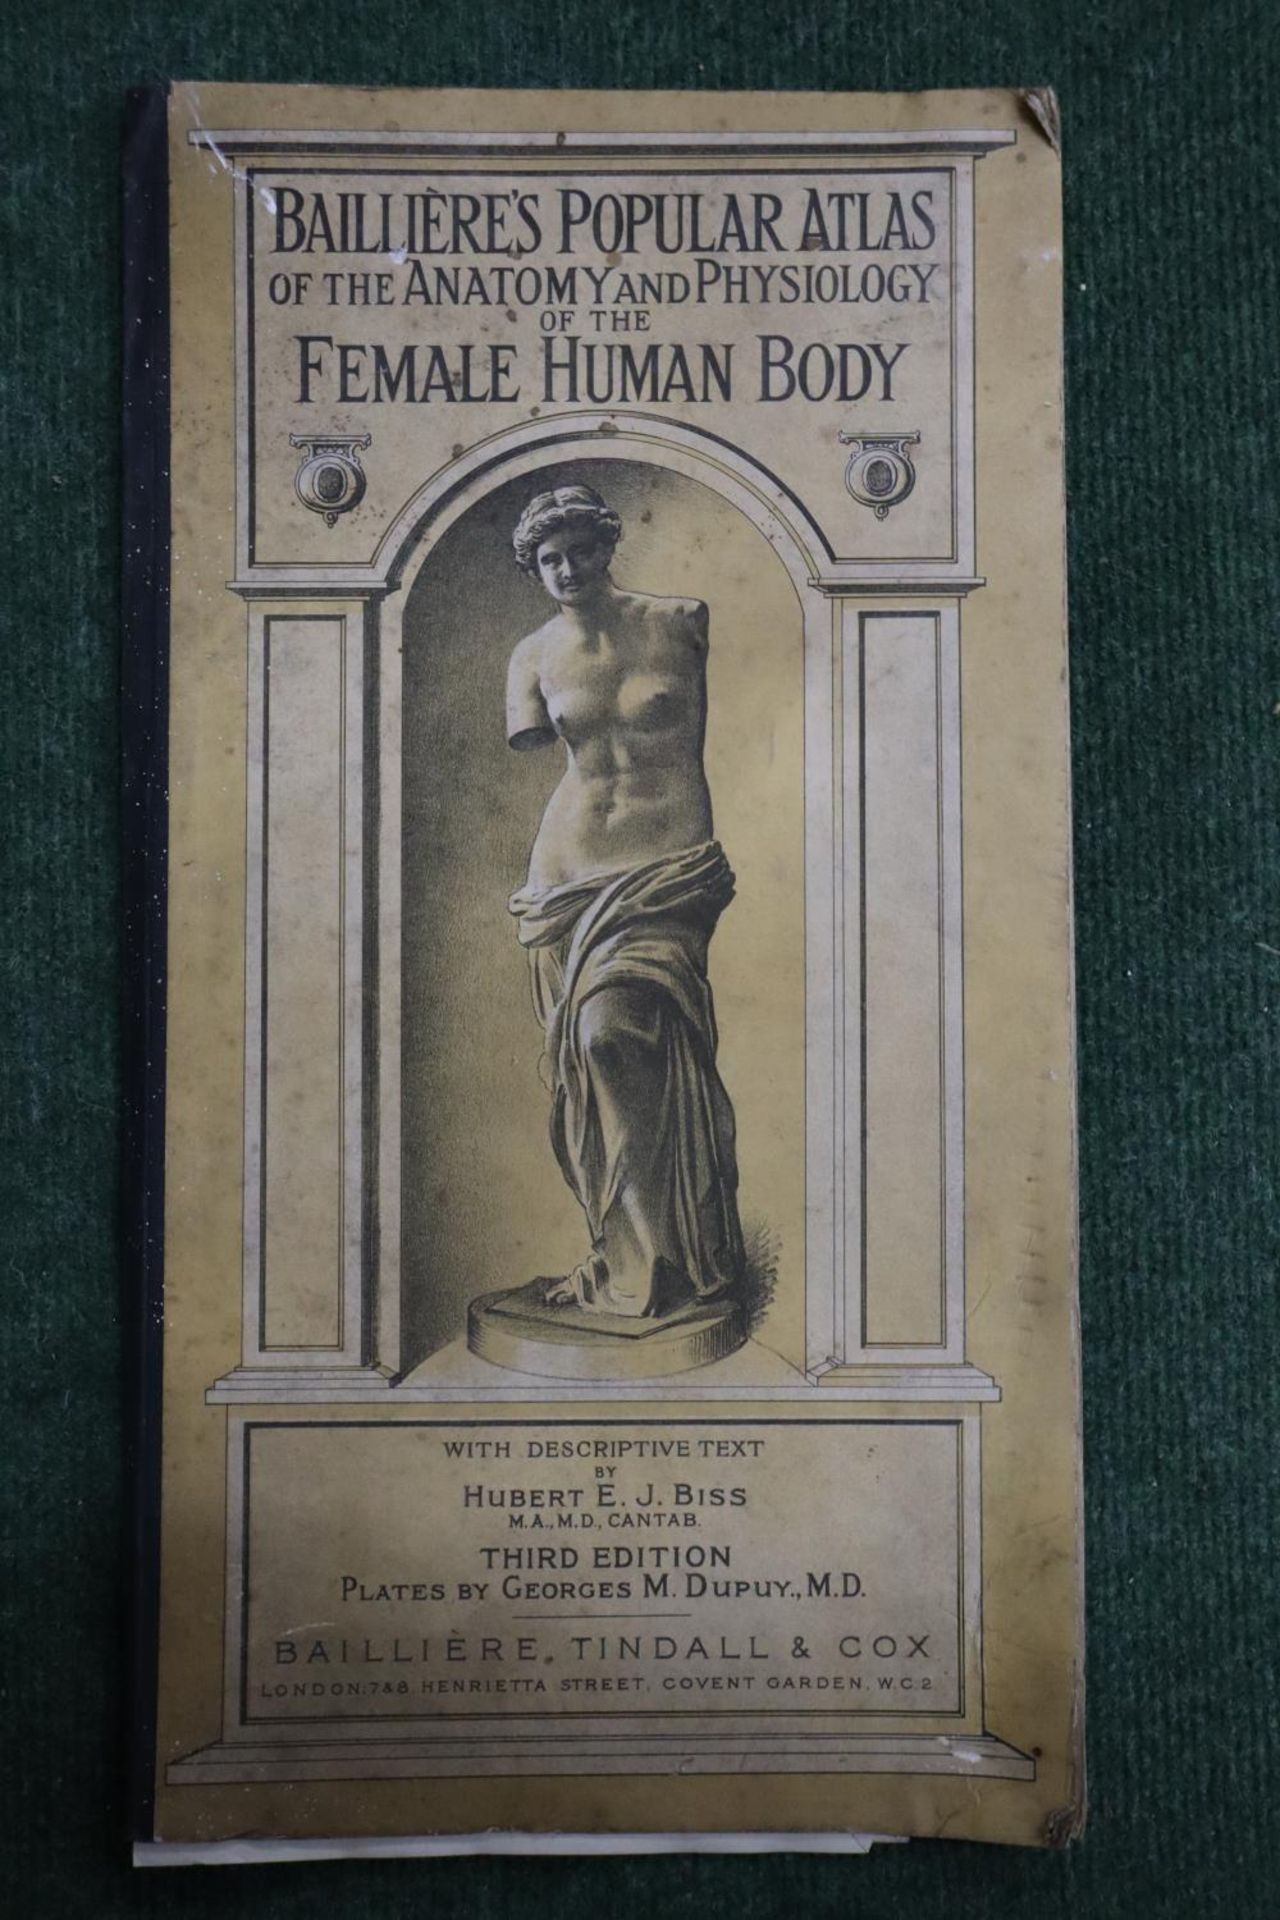 A VINTAGE BAILLIERE'S POPULAR ATLAS OF THE ANATOMY AND PHYSIOLOGY OF THE FEMALE HUMAN BODY BY HUBERT